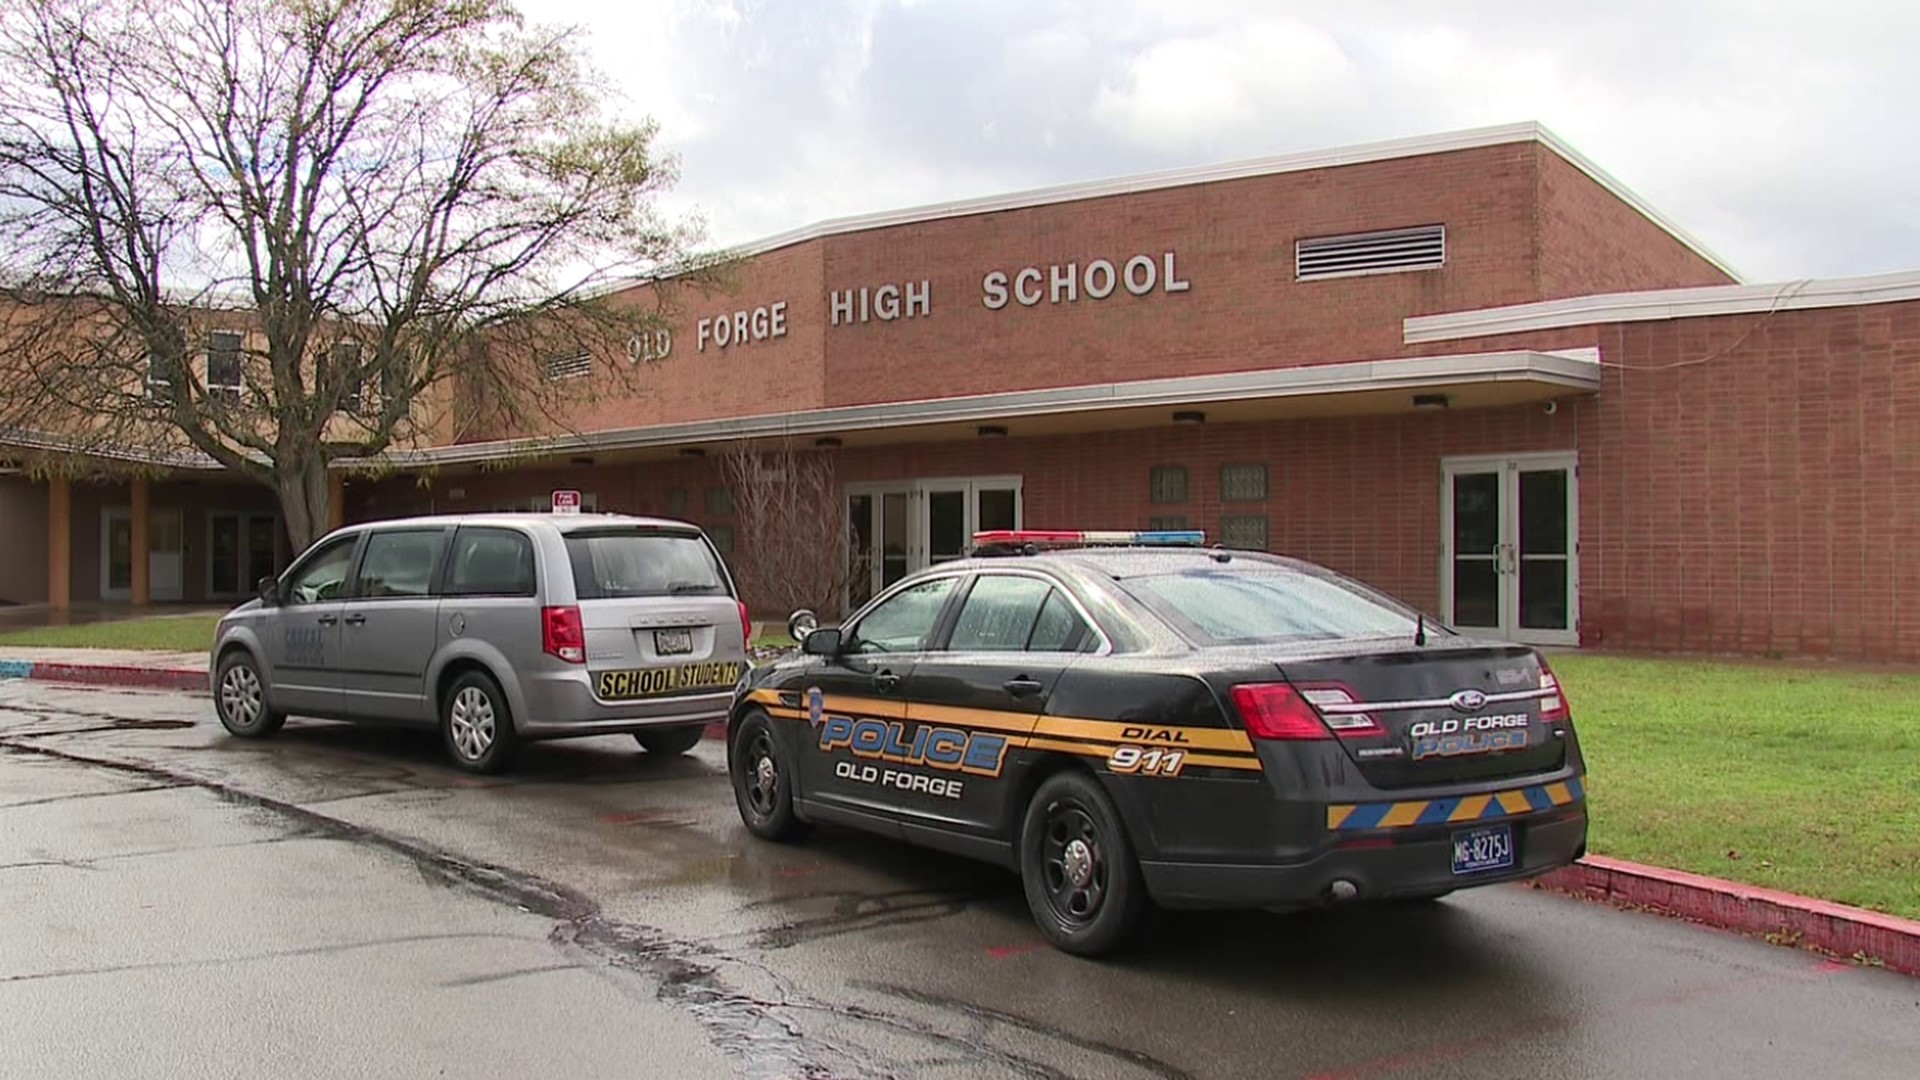 Old Forge School District is one of many to receive threats recently.  District officials say they prepare and police explain how they react and hope to make arrest.